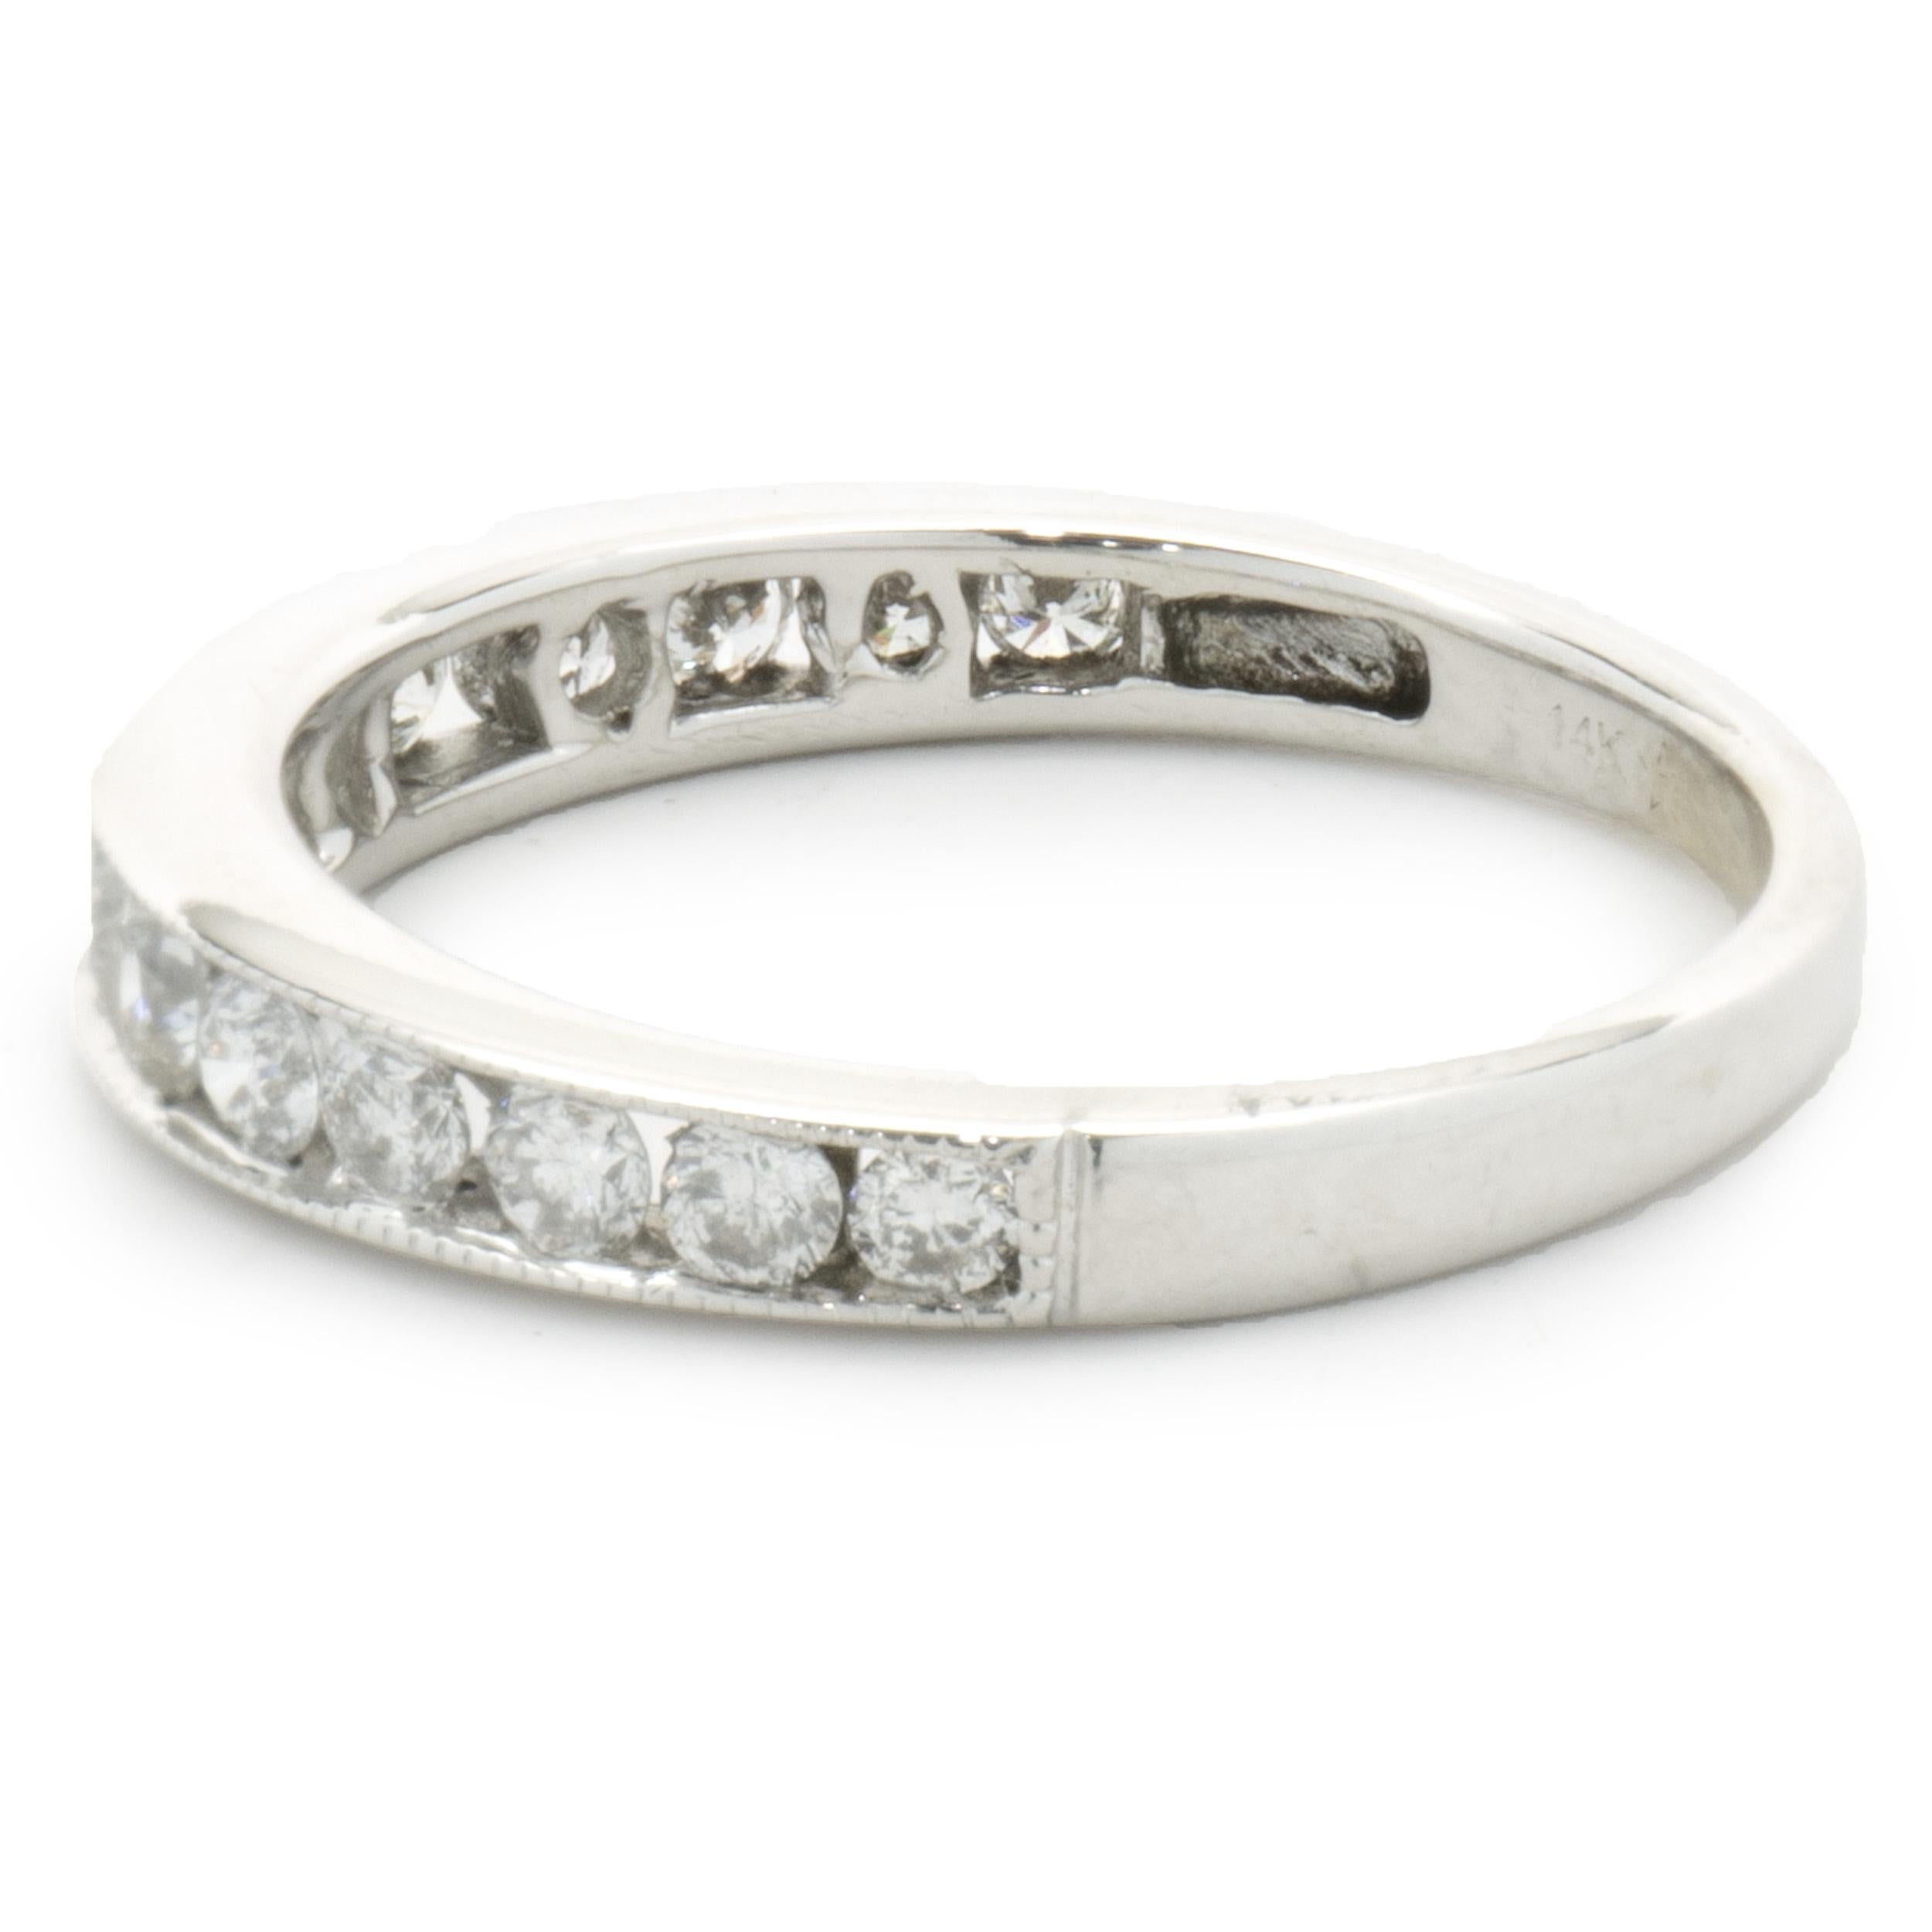 Designer: Custom
Material: 14K white gold
Diamonds: 14 round brilliant cut = 0.70cttw
Color: H
Clarity: SI2
Size: 6.75 sizing available 
Dimensions: ring measures 3.66mm in width
Weight: 2.43 grams